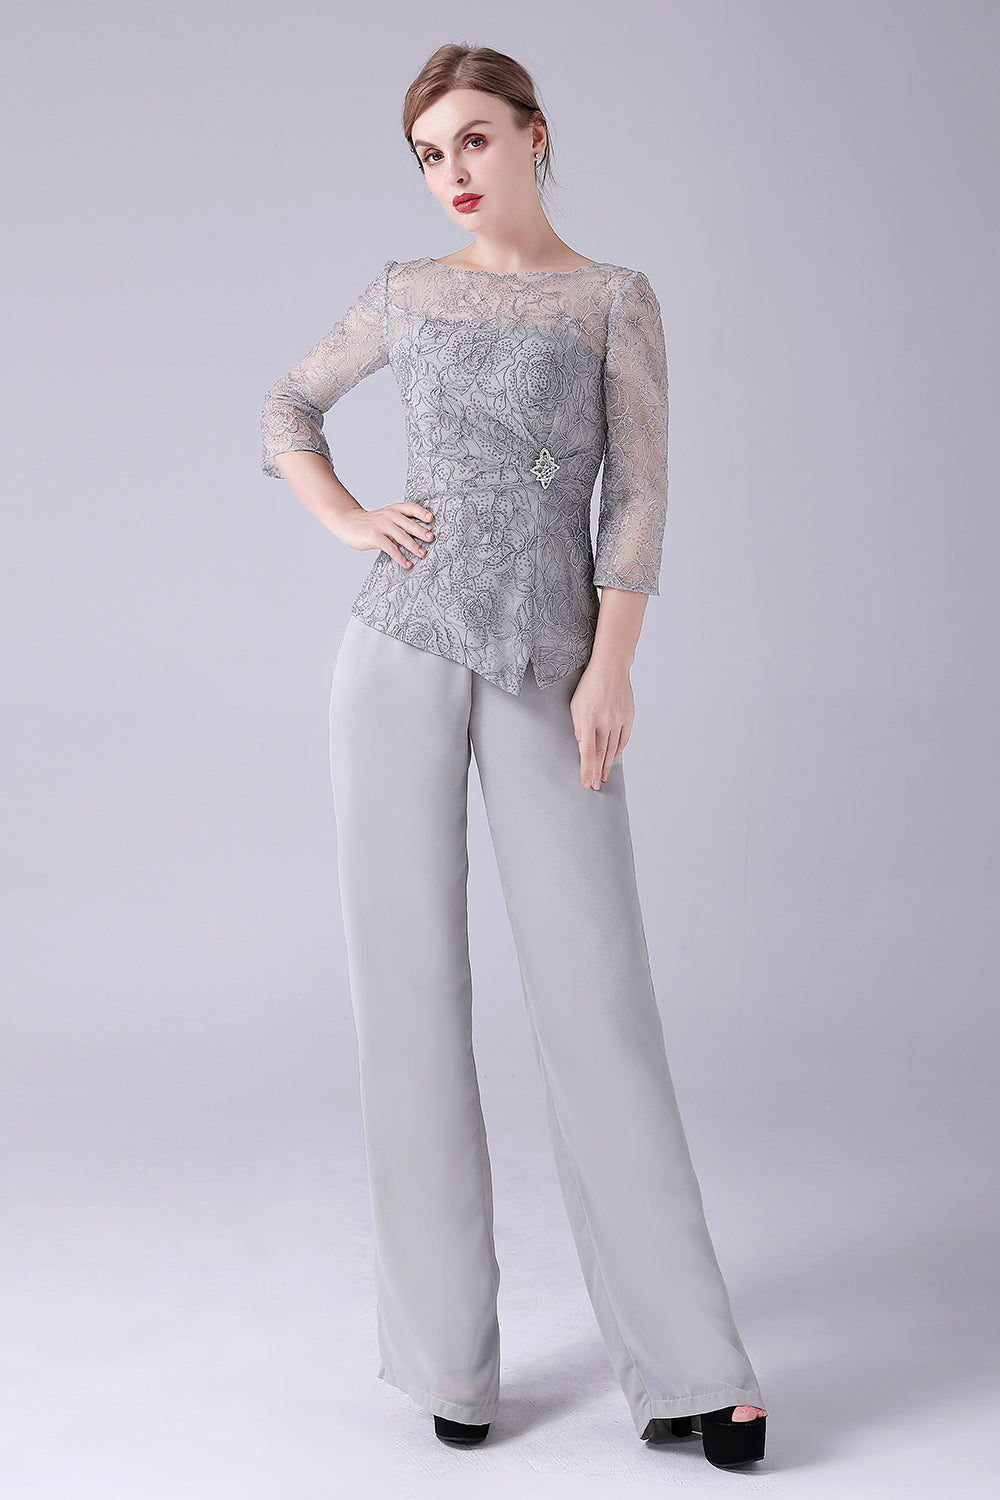 Zapaka Women Silver 2 Pieces Slim Elegant Mother of the Bride Pant Suits –  ZAPAKA NZ